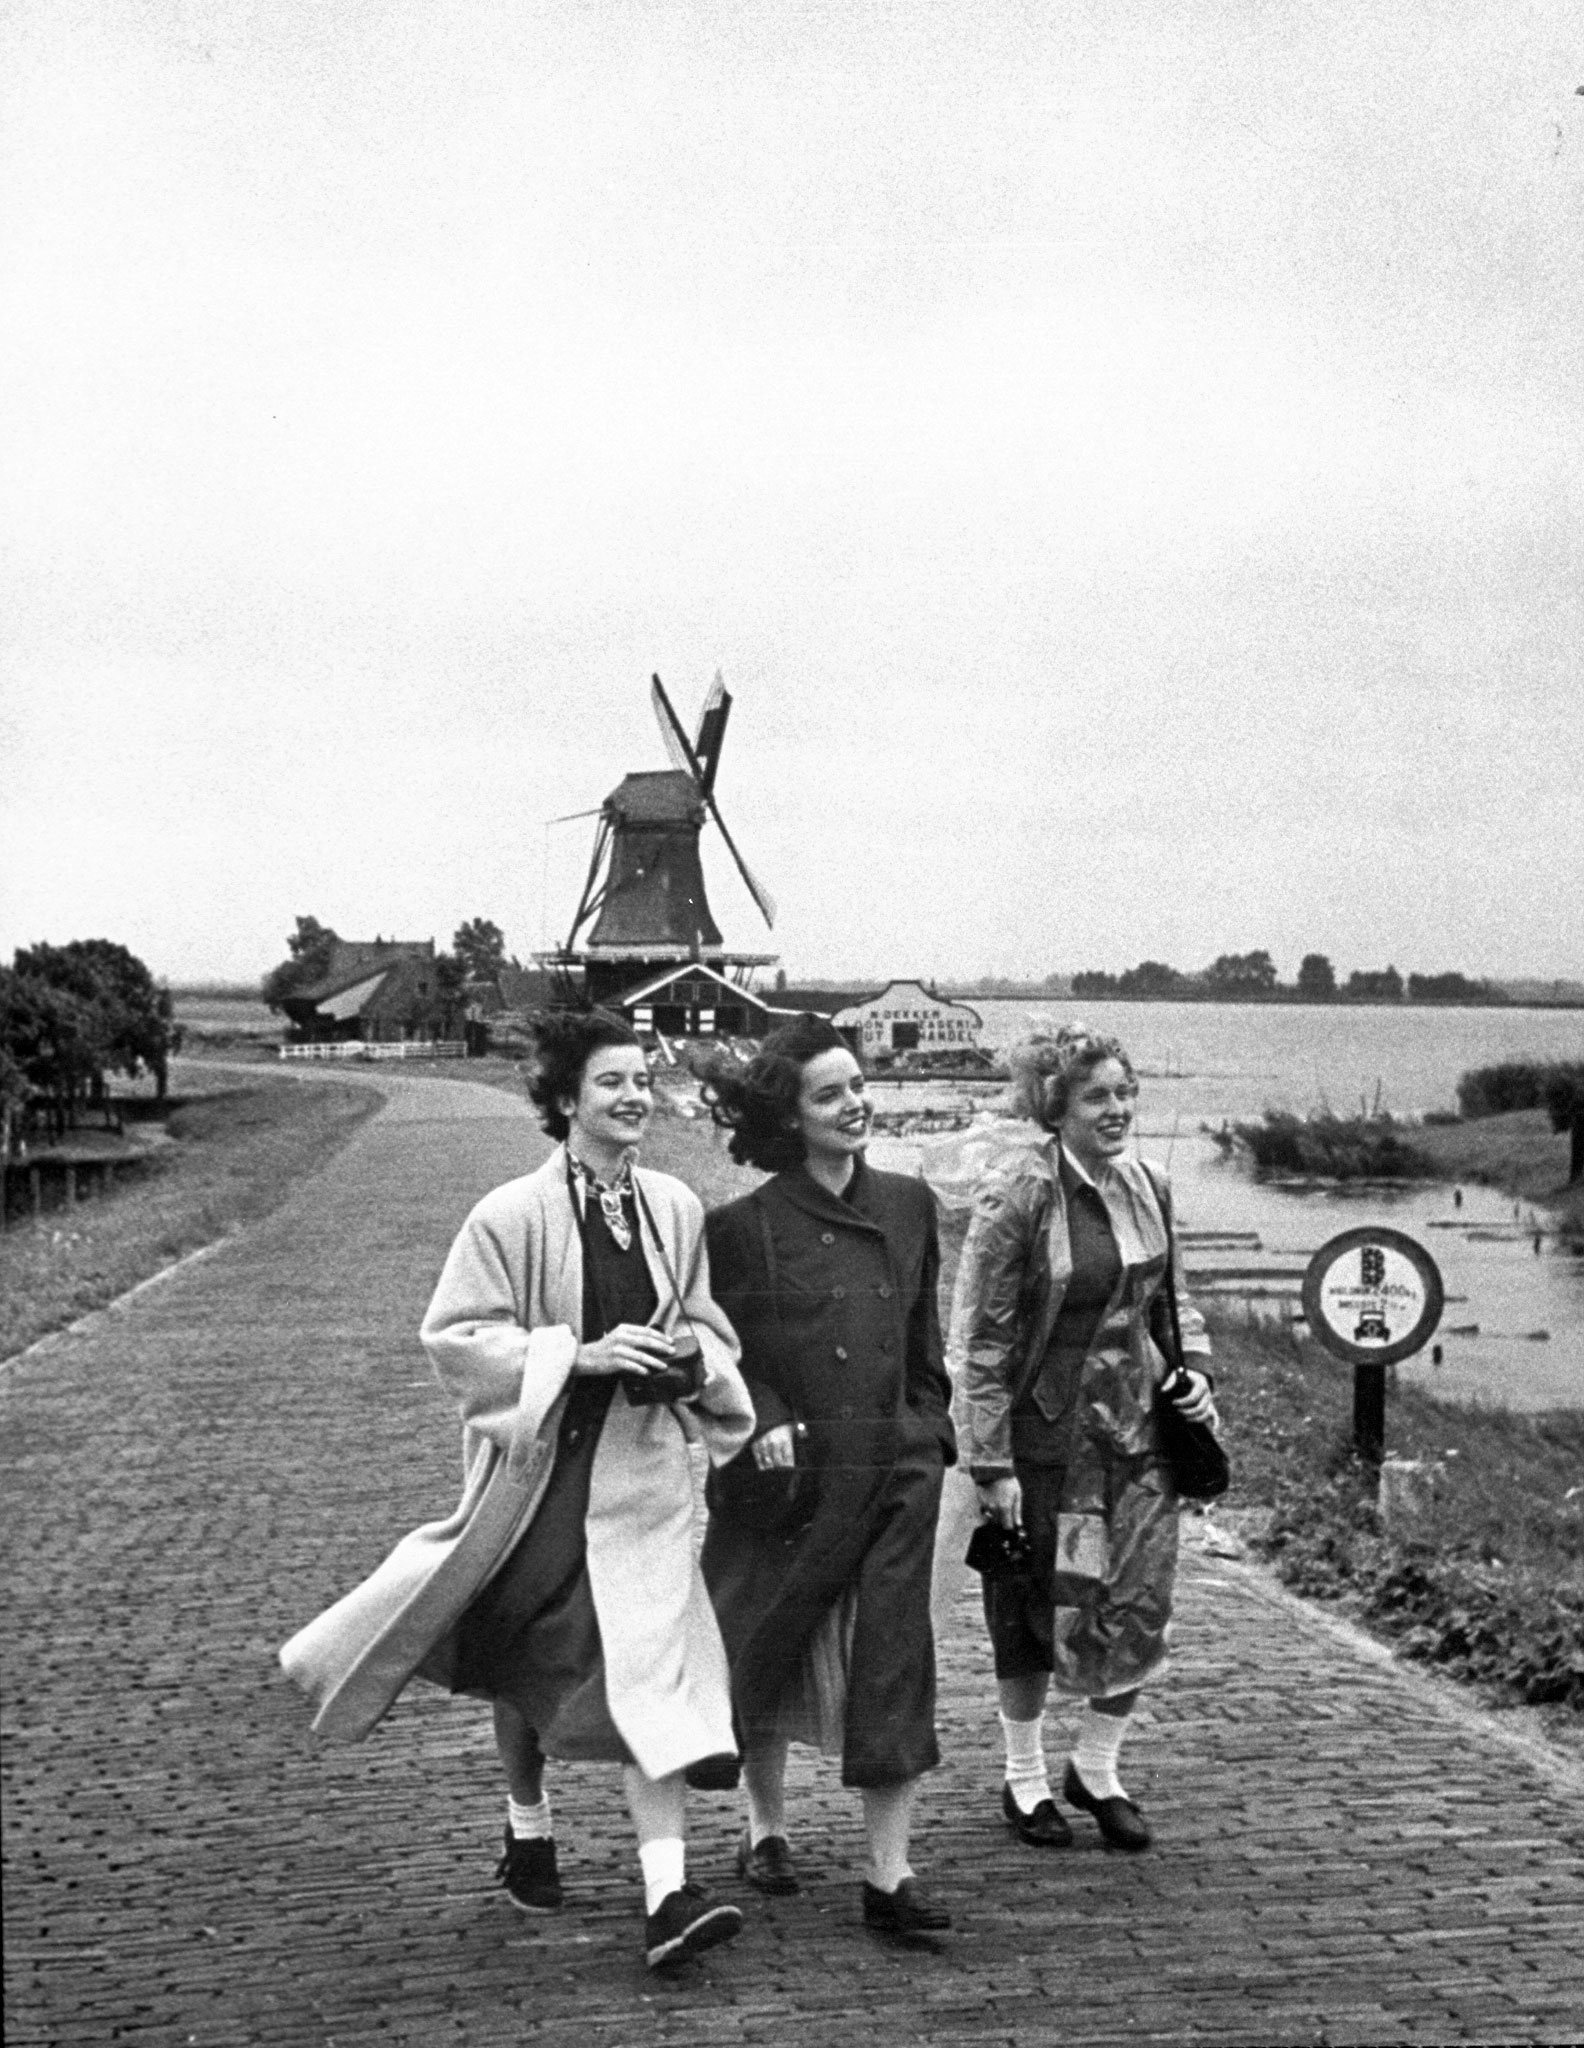 Girls walk away from a Dutch windmill after photographing it.